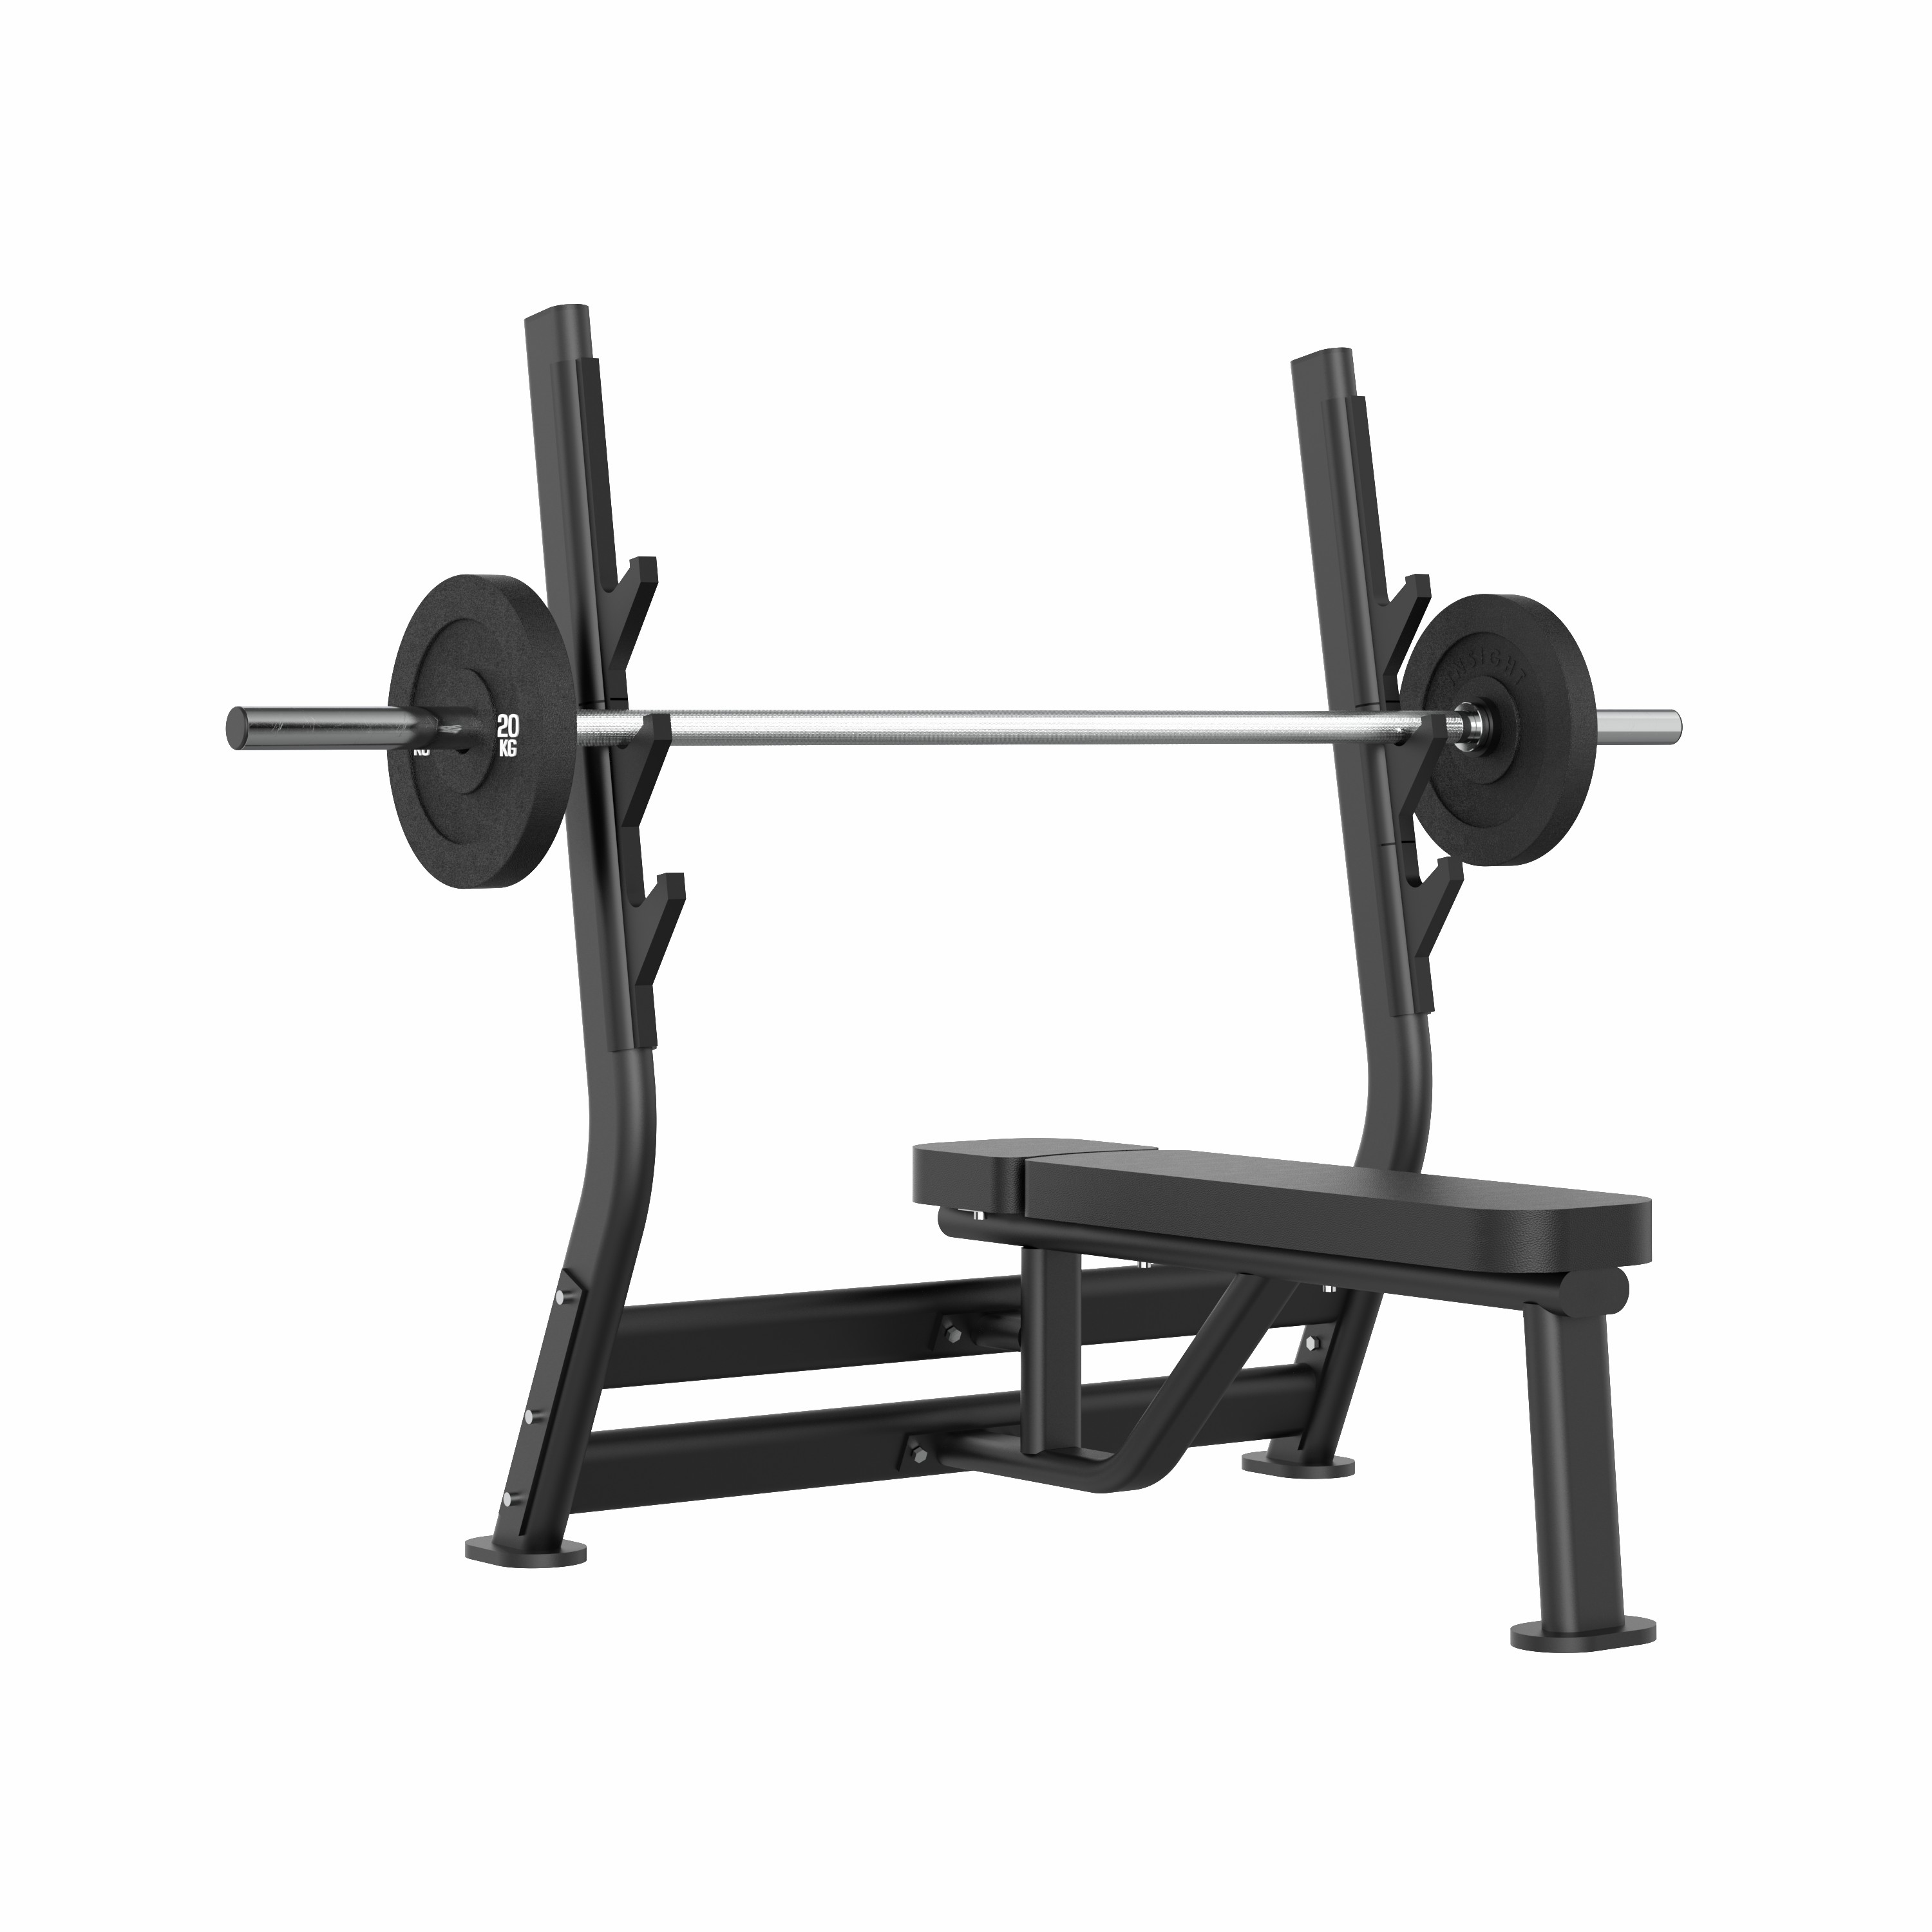 OFB02 – Flat Olympic Benches